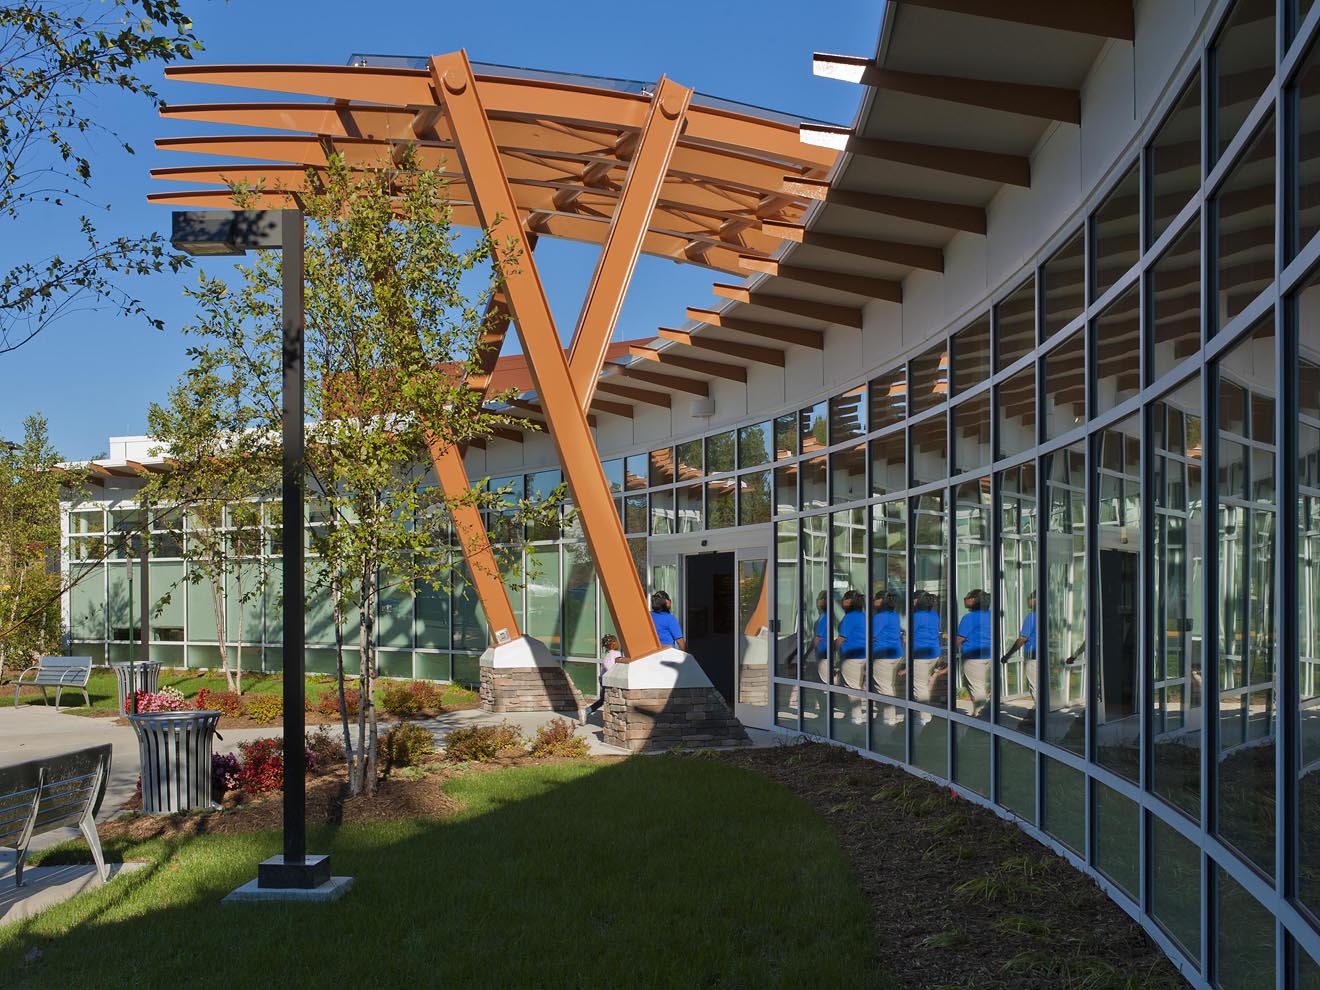 person entering library entrance under canopy during daytime